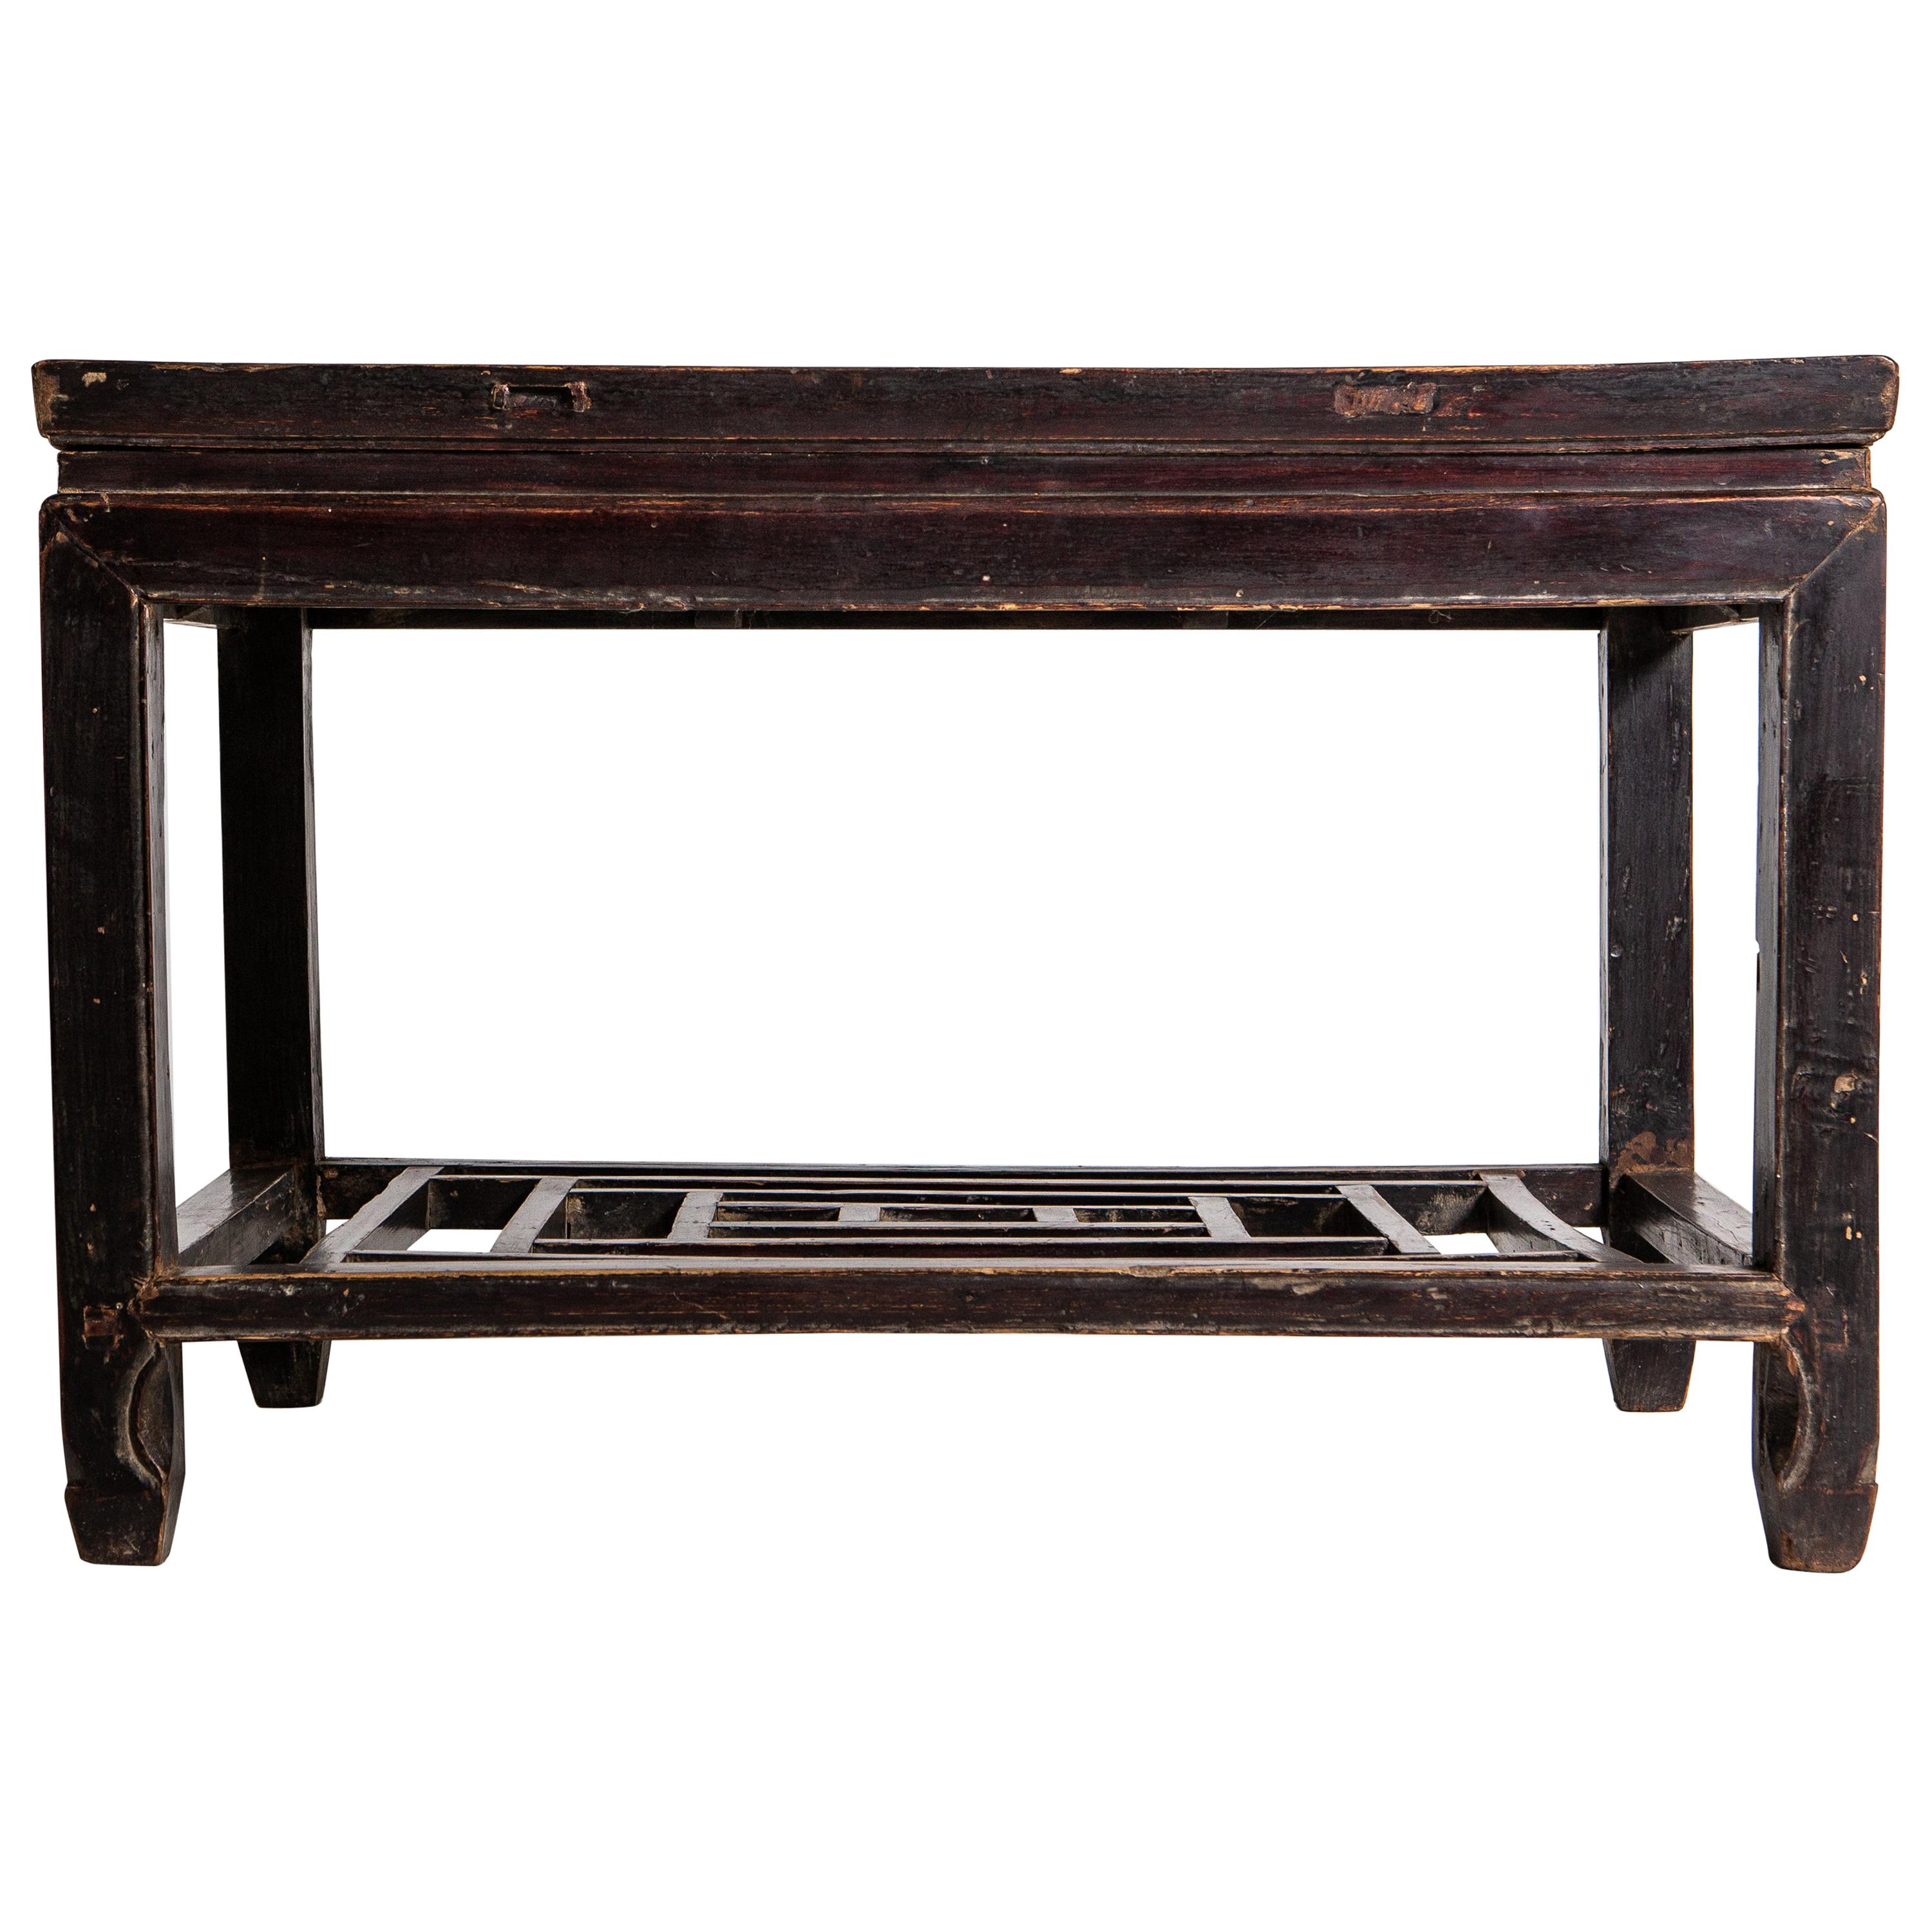 Qing Dynasty Side Table with Shelf